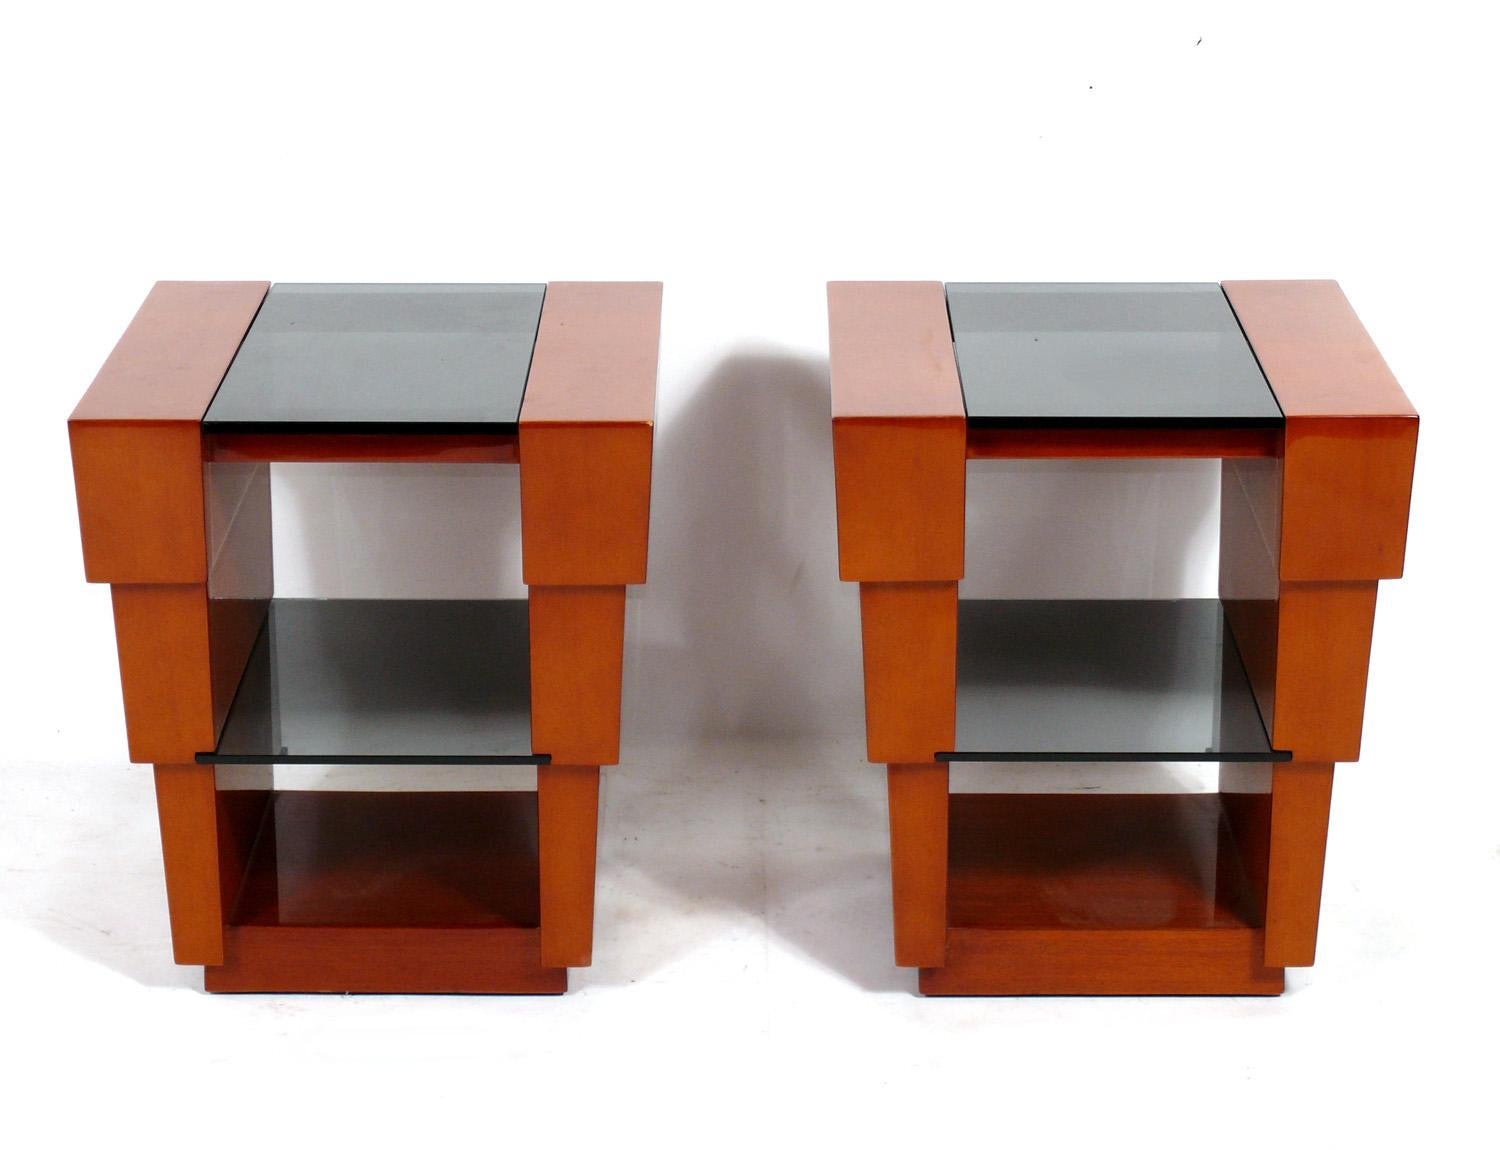 Pair of elegant stepped design tables, designed by Enrique Garcel, Colombia, circa 1980s. They are a versatile size and can be used as end or side tables, or as night stands. They are constructed of tropical woods and smoked glass.